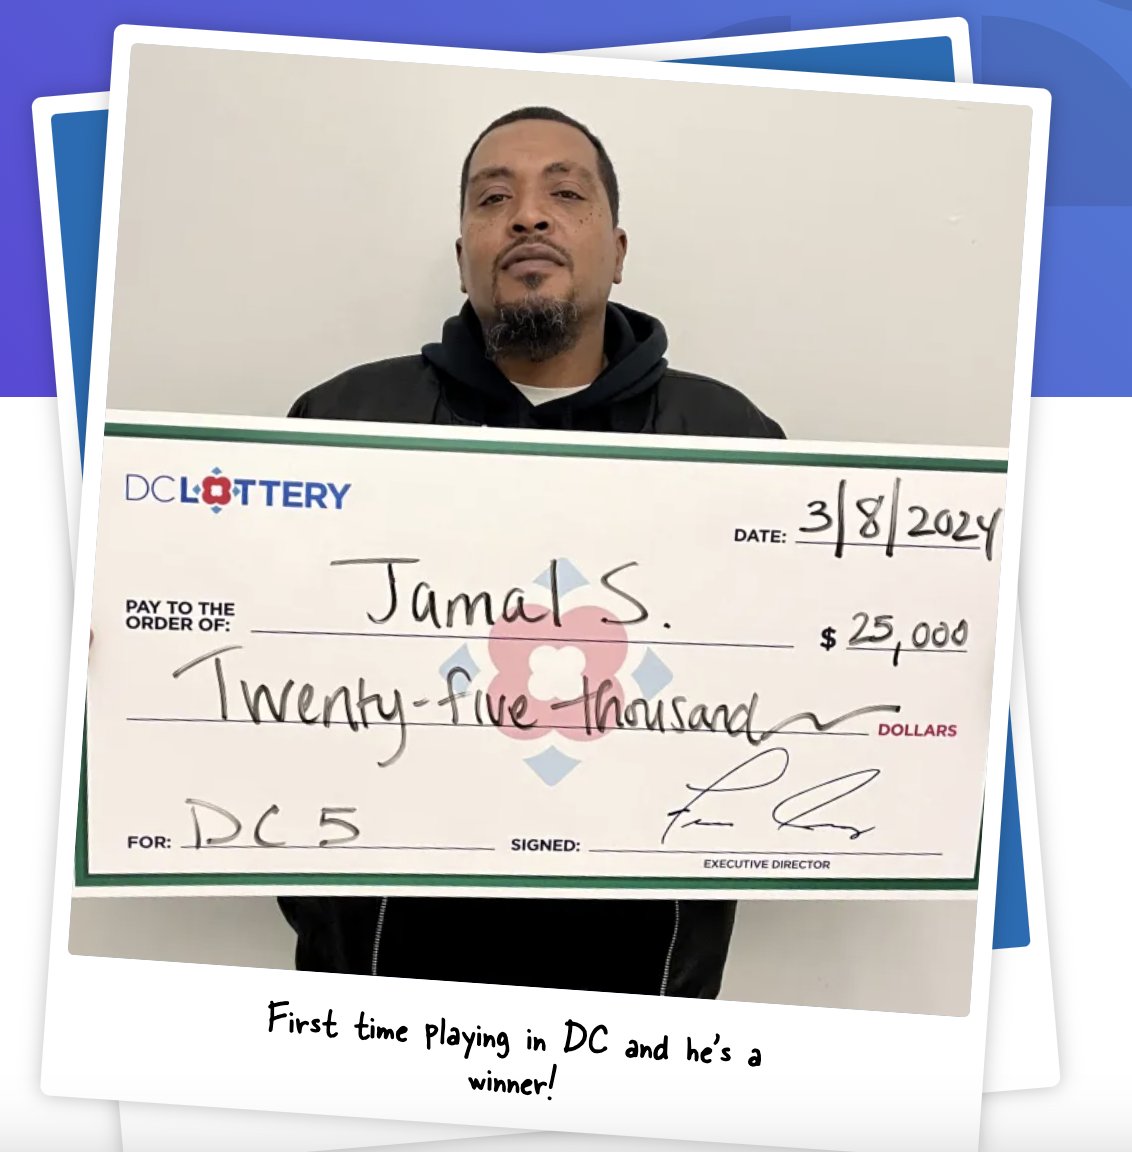 It only took one time for Jamal S. to win with DC Lottery! His first time playing earned him $25,000 with #DC5 😲 What's next? Saving towards a home...and playing with DC Lottery again! Learn more about our winners here: bit.ly/45QVppz